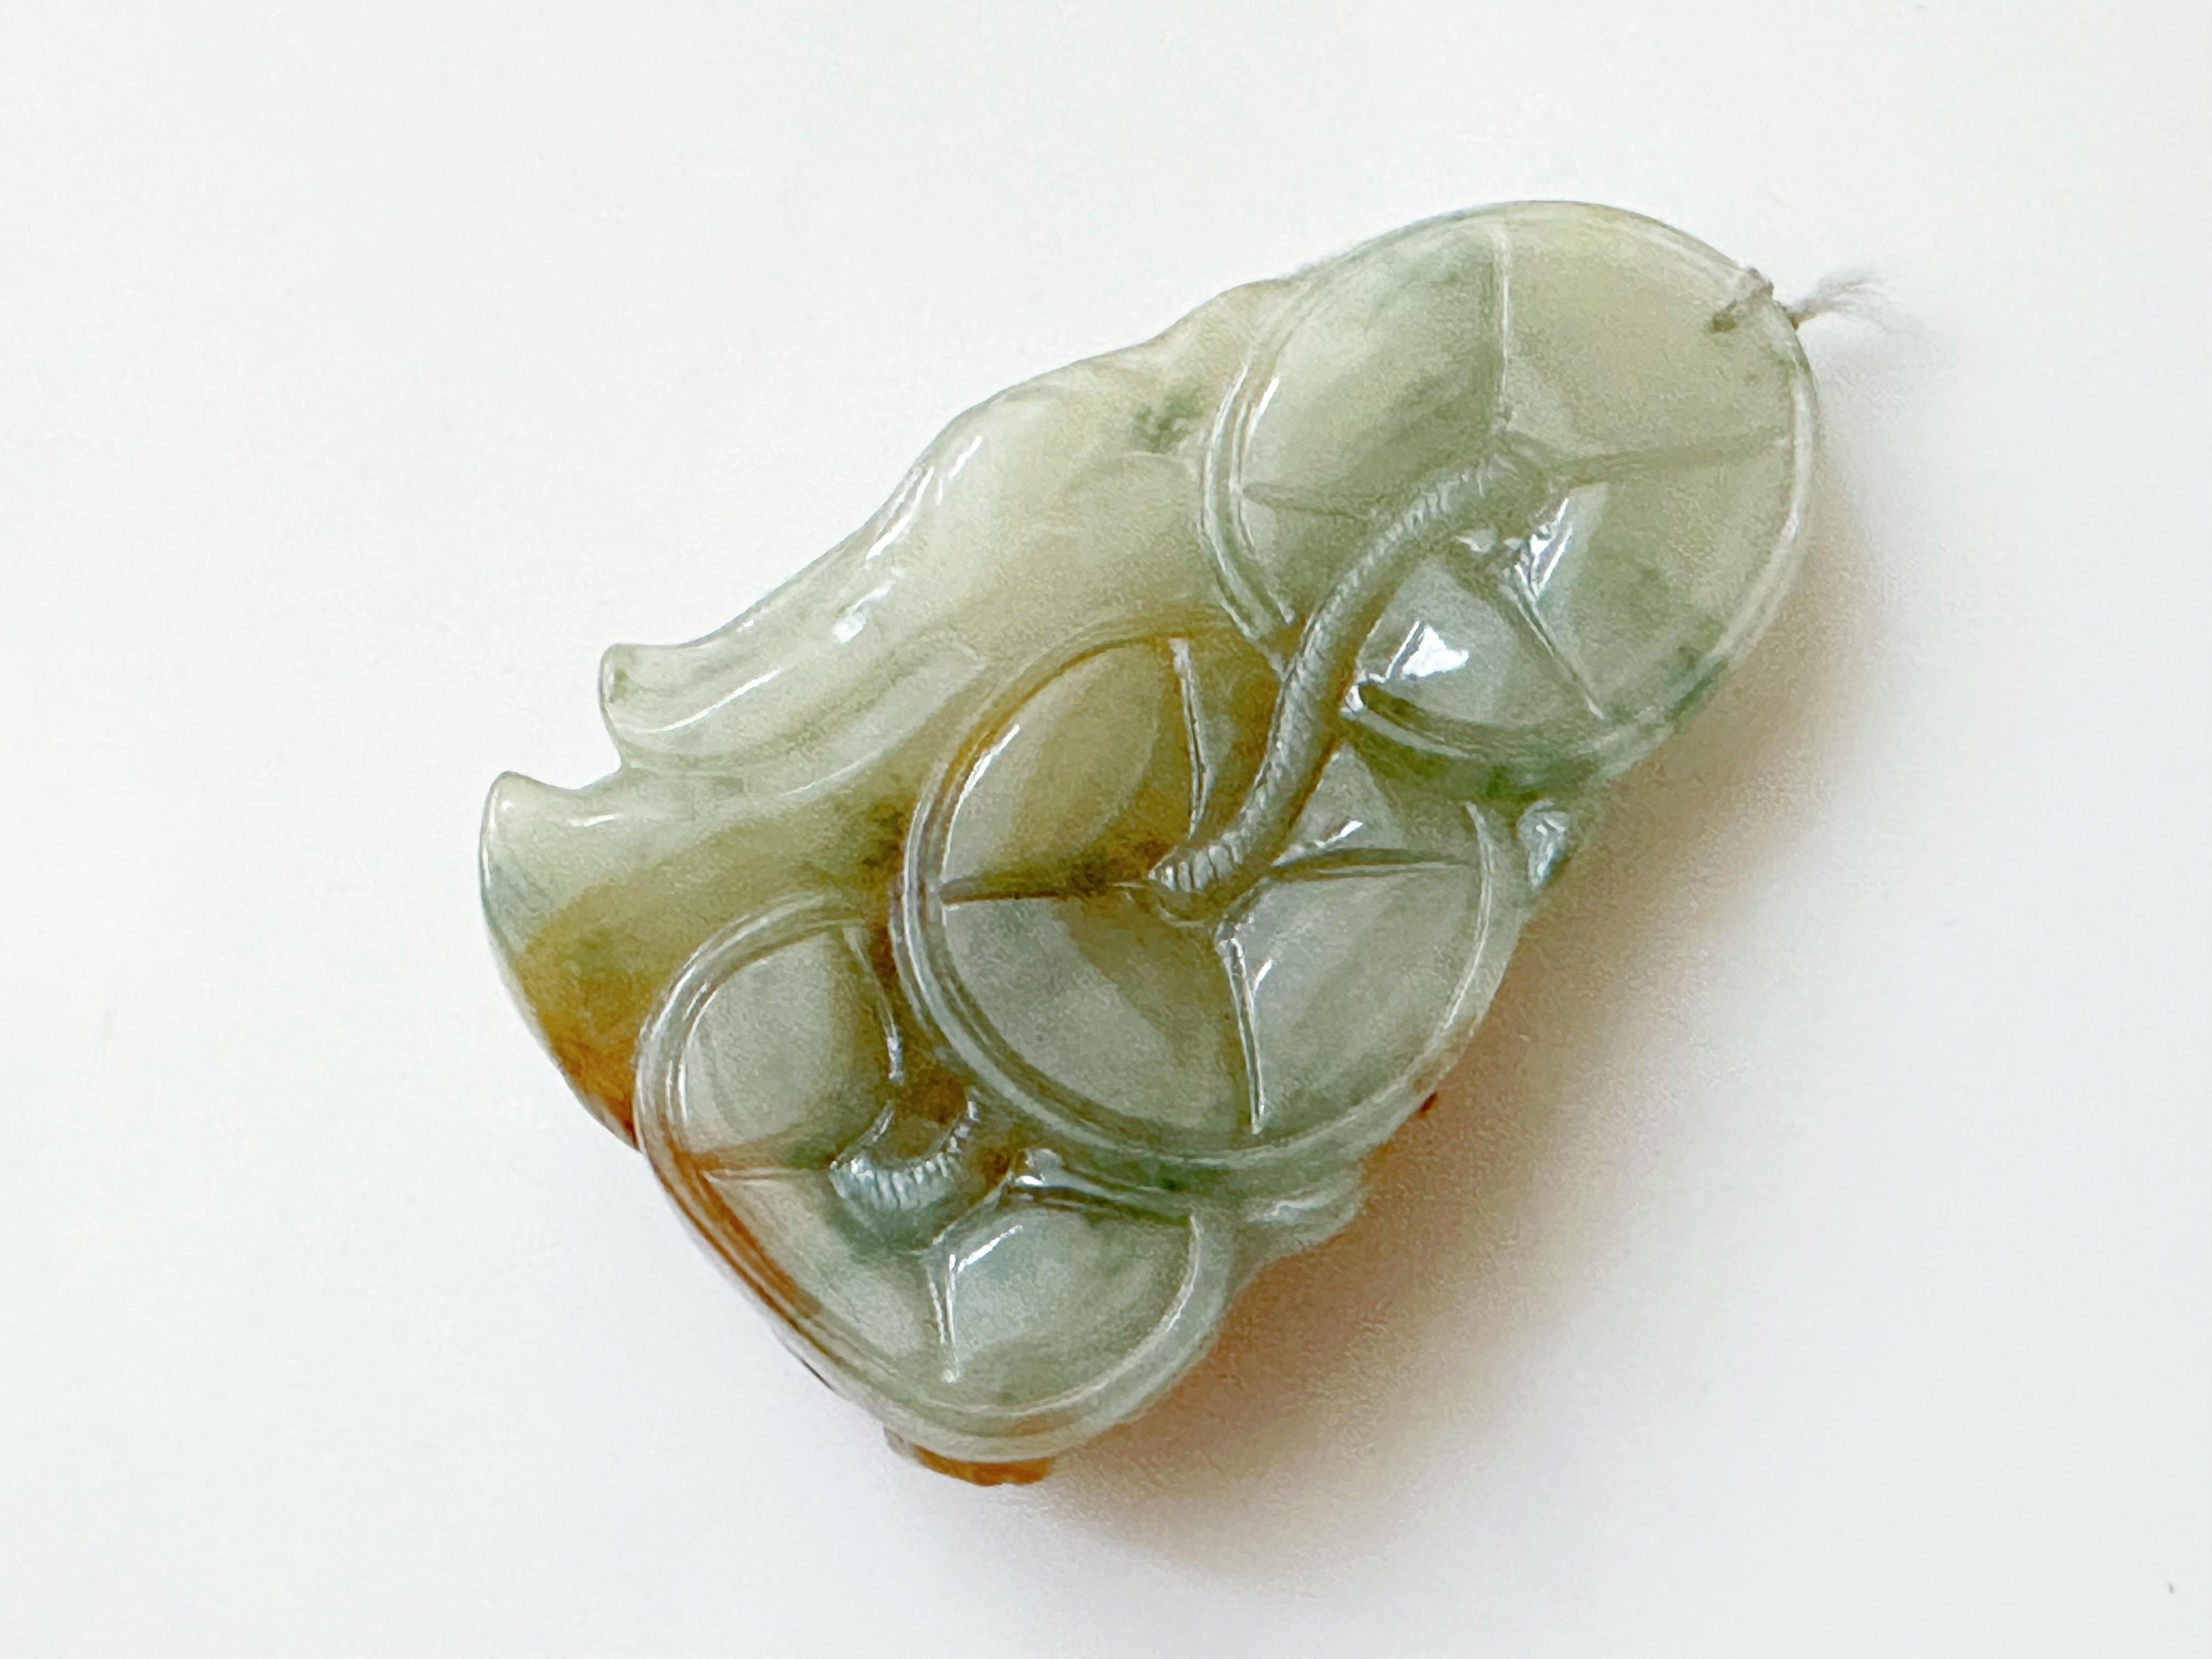 This jade pendant is 100% natural, untreated, and undyed Type A Myanmar jadeite. It is hand-carved into Liu Haichan. Beautiful translucent icy texture with tricolor green, yellow, and red patches gifted by Mother Nature makes this pendant unique and